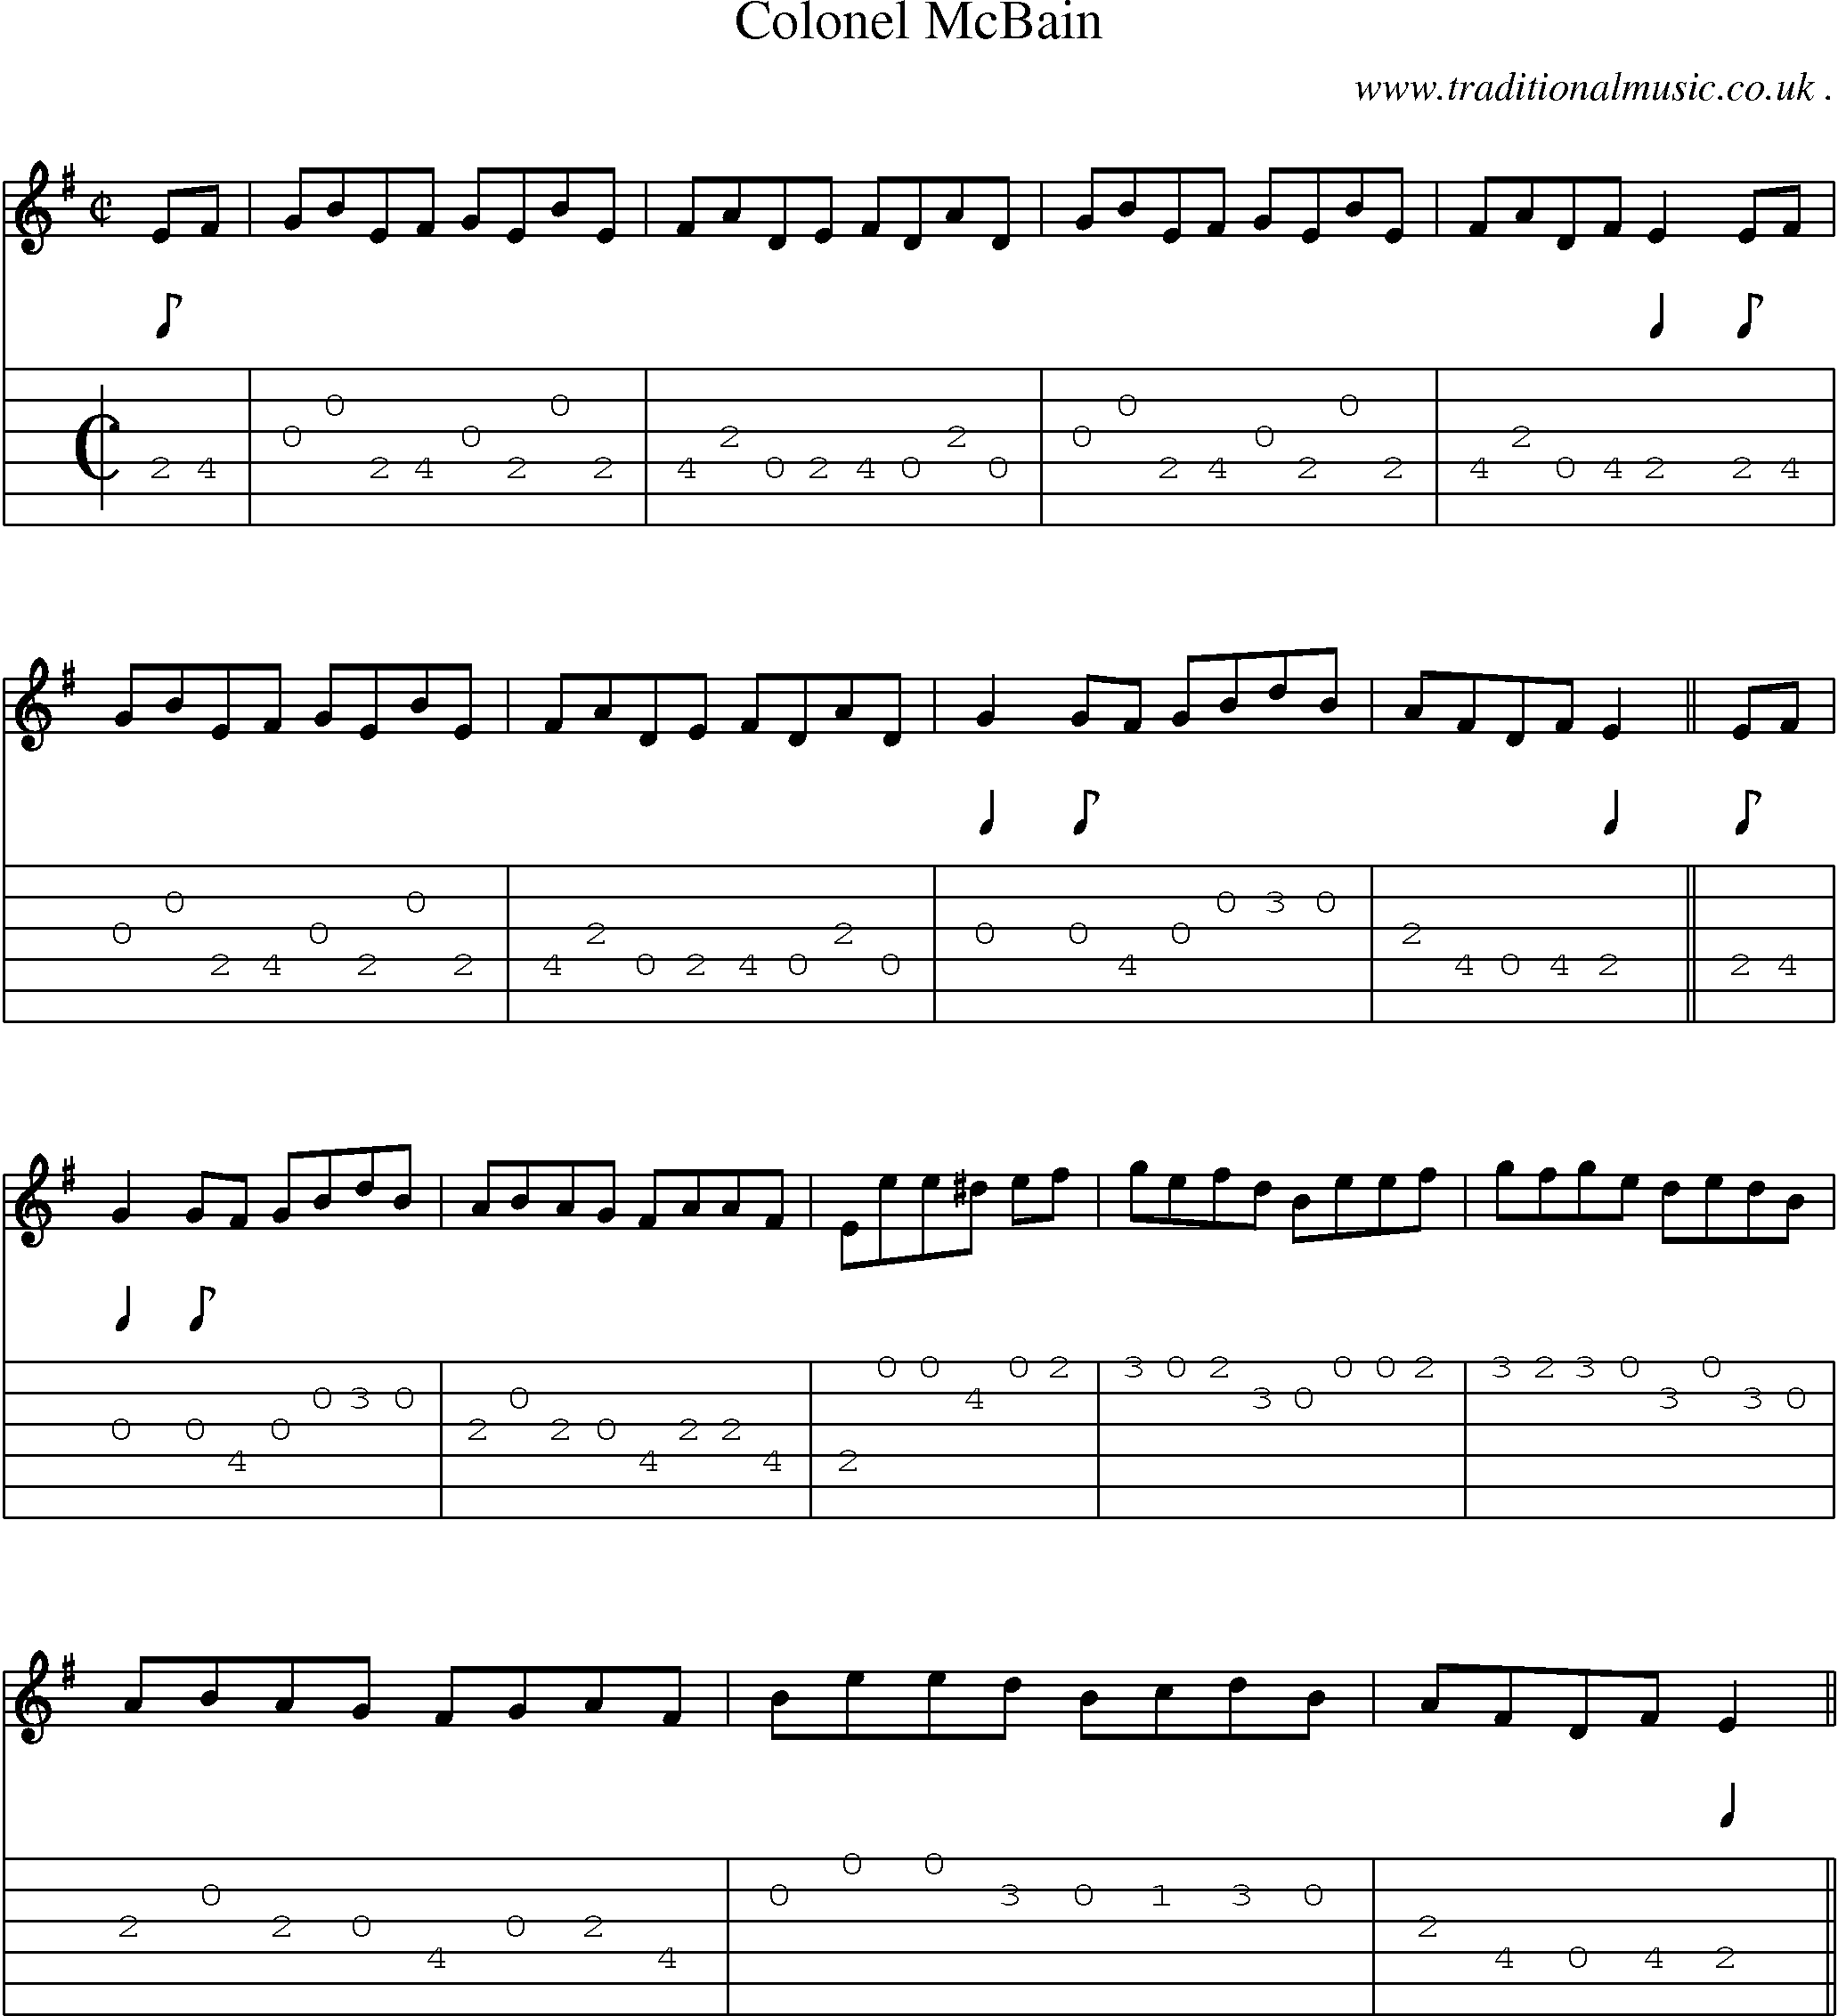 Sheet-music  score, Chords and Guitar Tabs for Colonel Mcbain